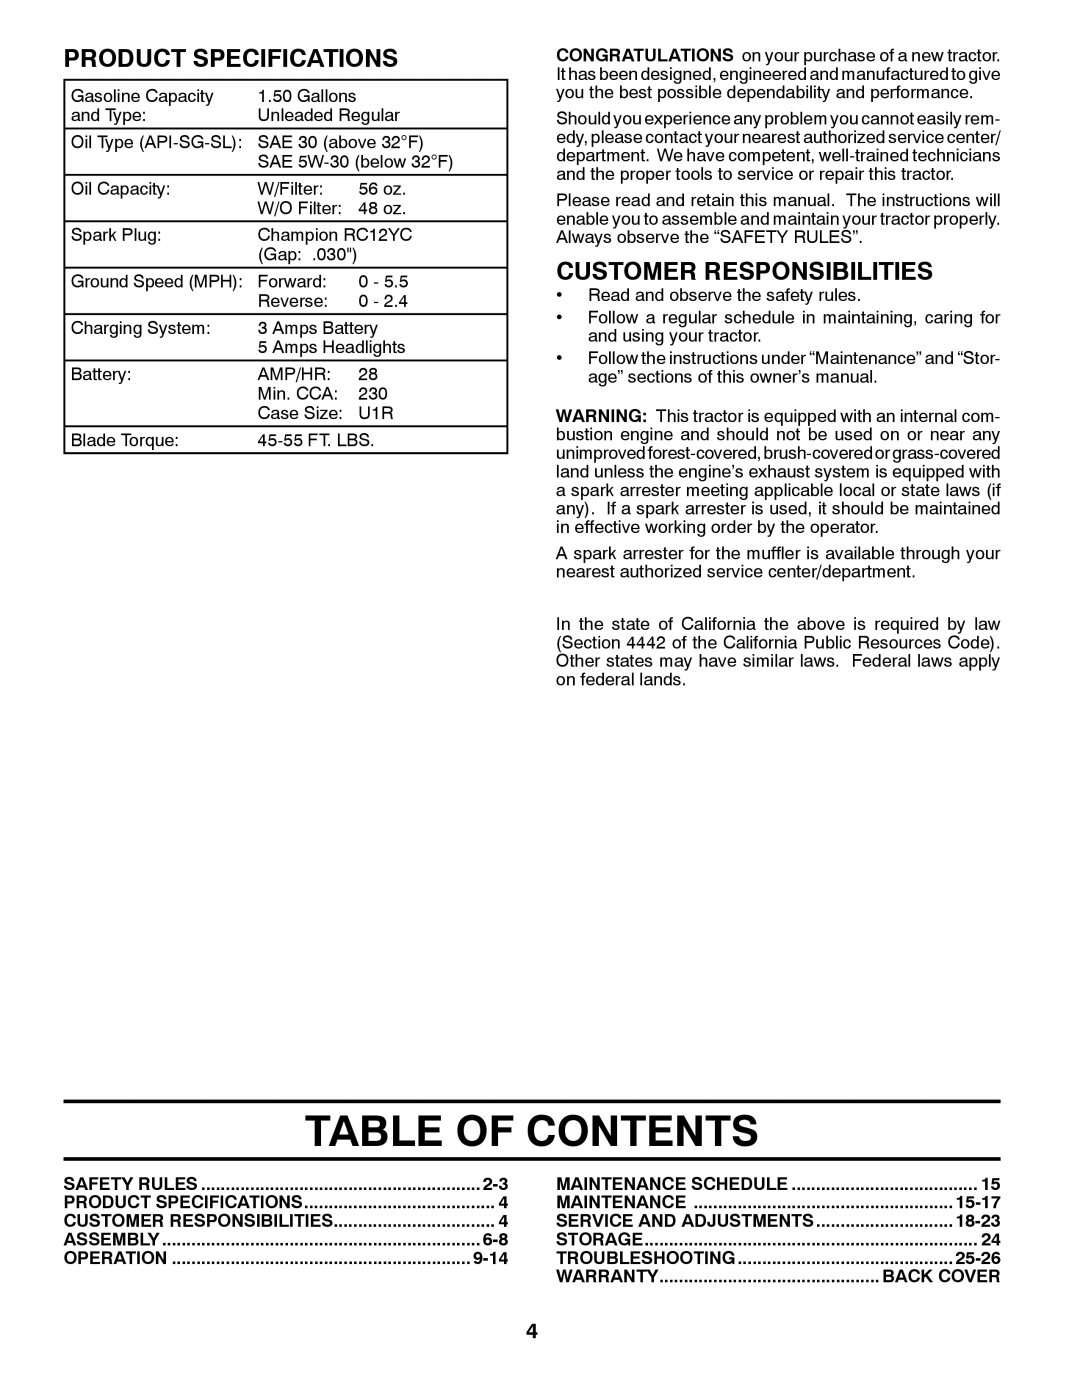 Poulan XT195H42LT manual Table Of Contents, Product Specifications, Customer Responsibilities, 9-14, 15-17, 18-23, 25-26 